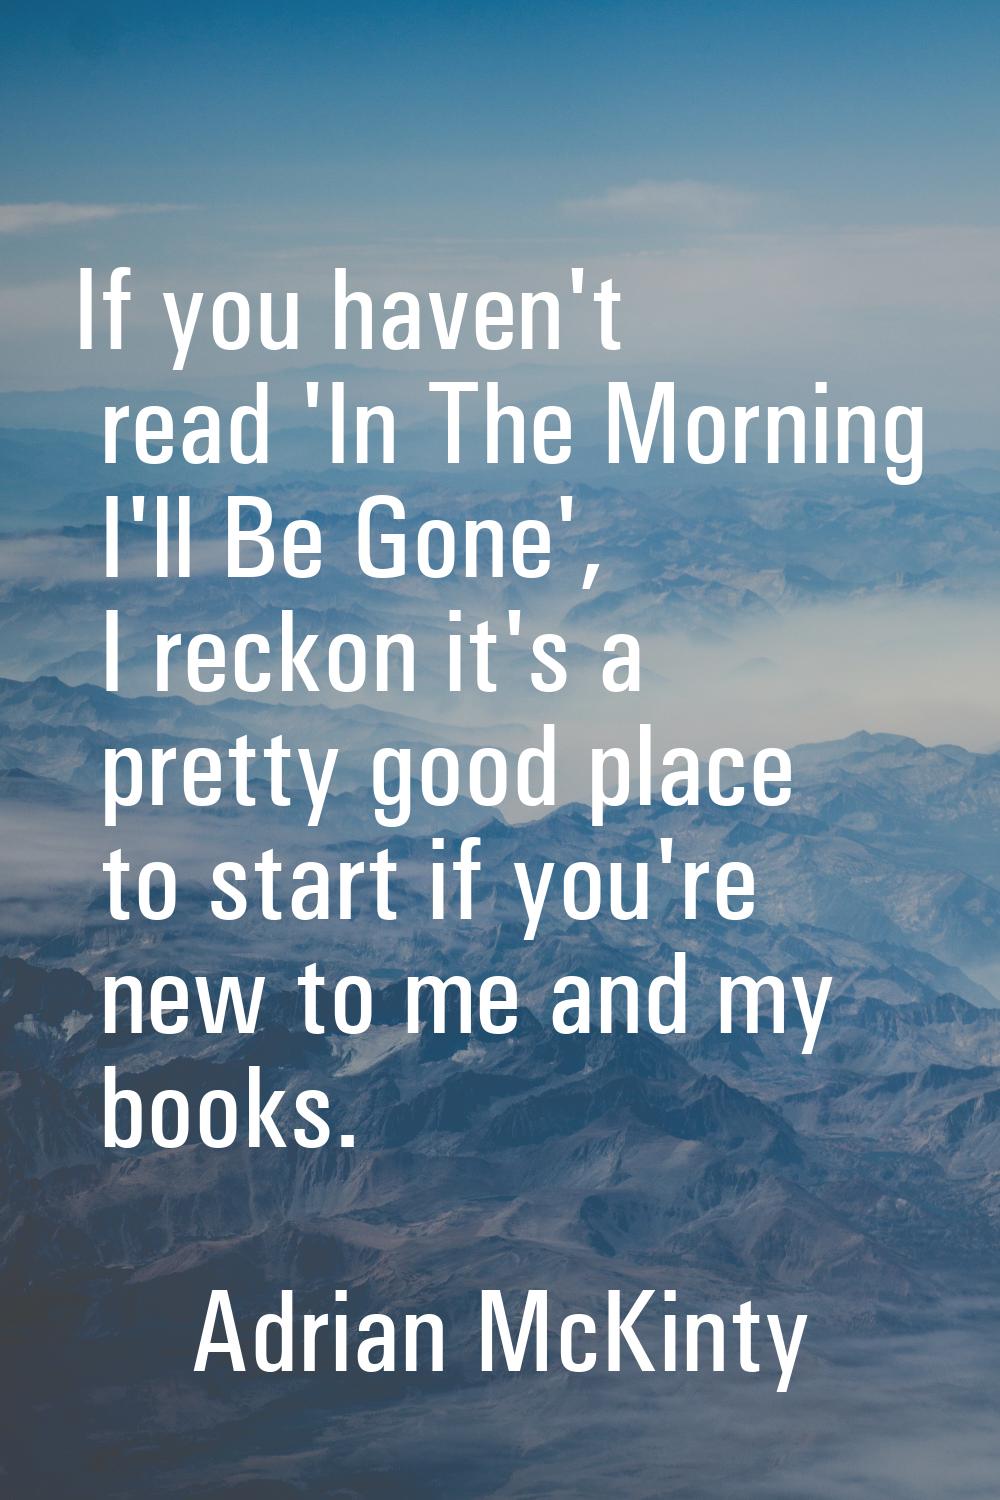 If you haven't read 'In The Morning I'll Be Gone', I reckon it's a pretty good place to start if yo